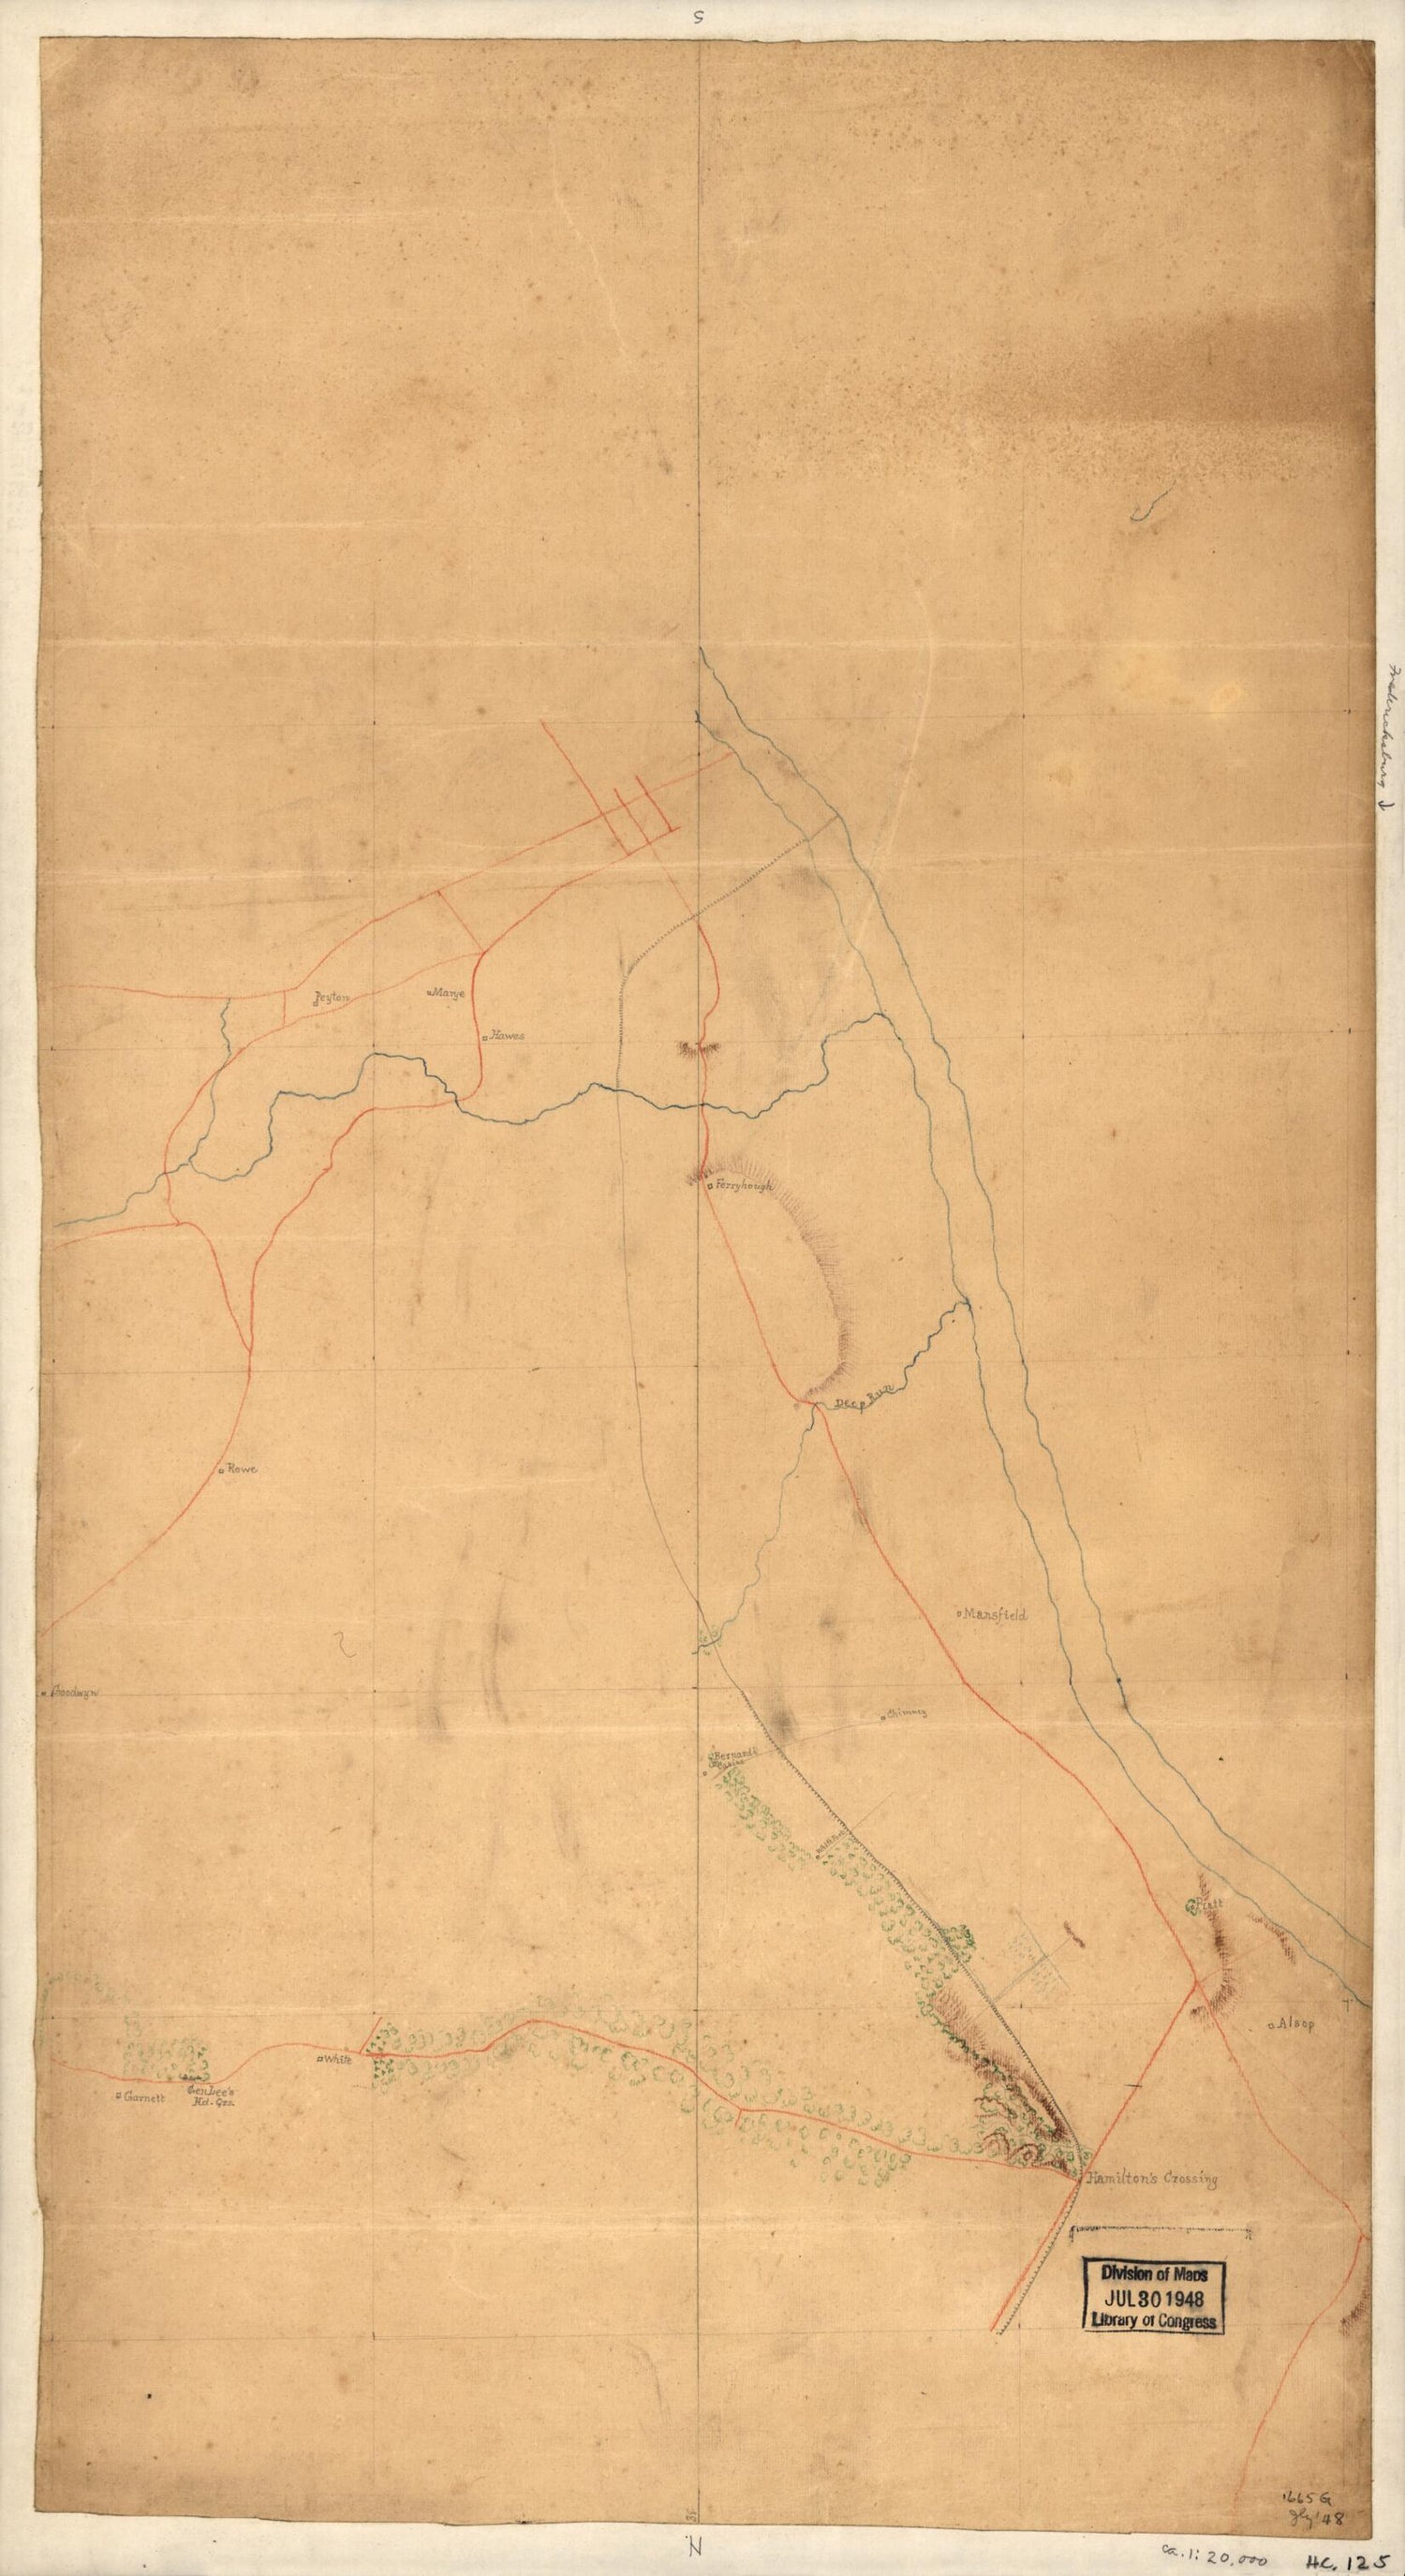 This old map of An Unfinished Drawing of the Battle of Fredericksburg, Saturday, December 13, from 1862 was created by  in 1862